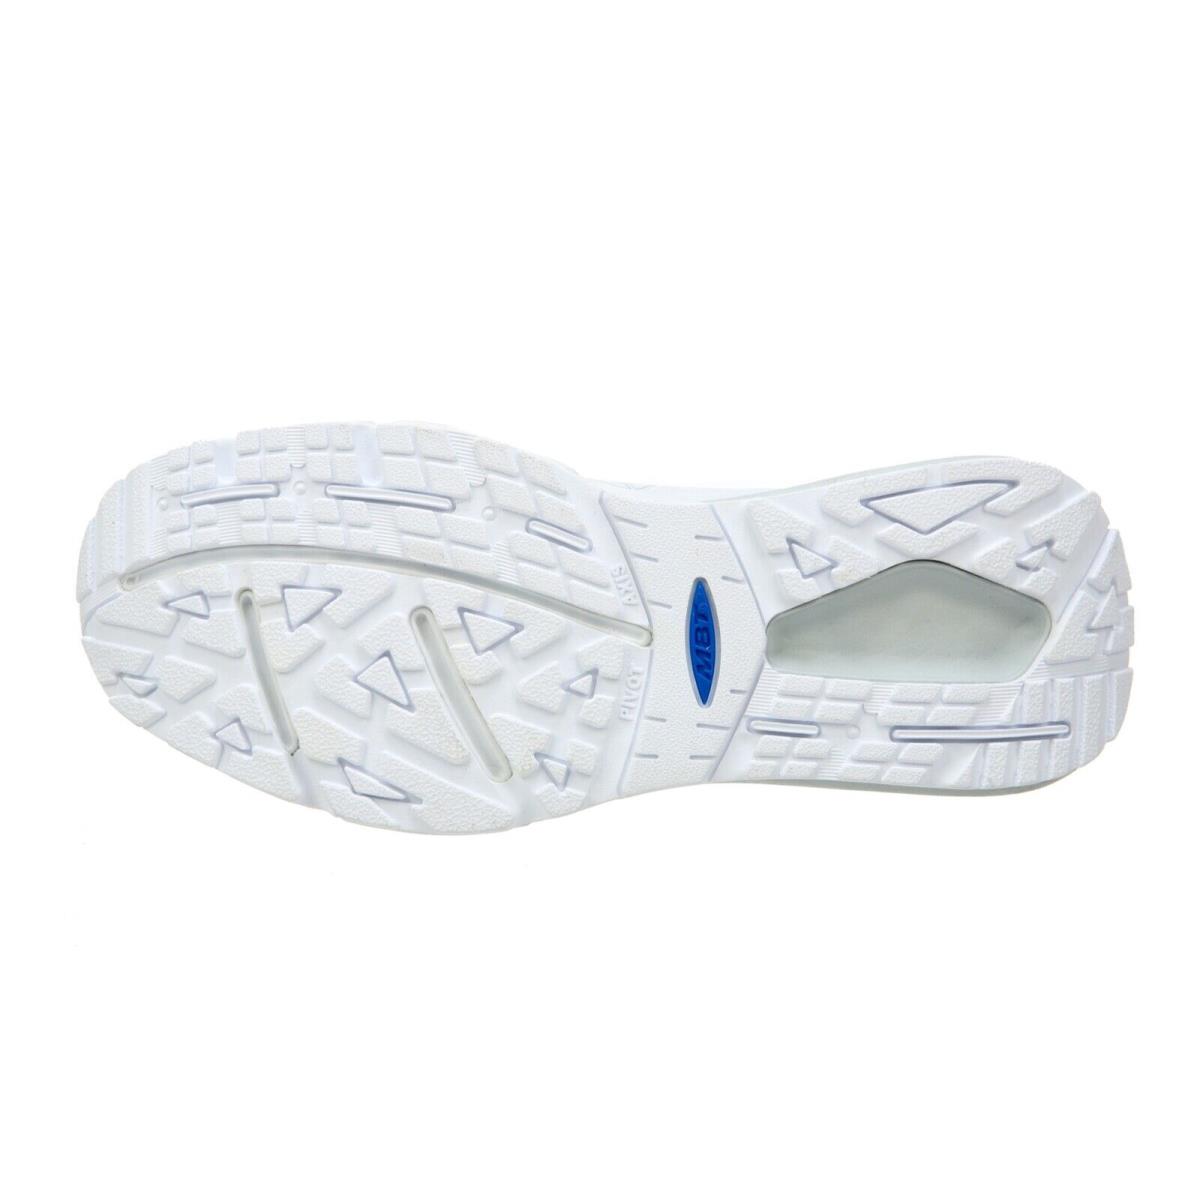 MBT shoes SIMBA TRAINER - White 1